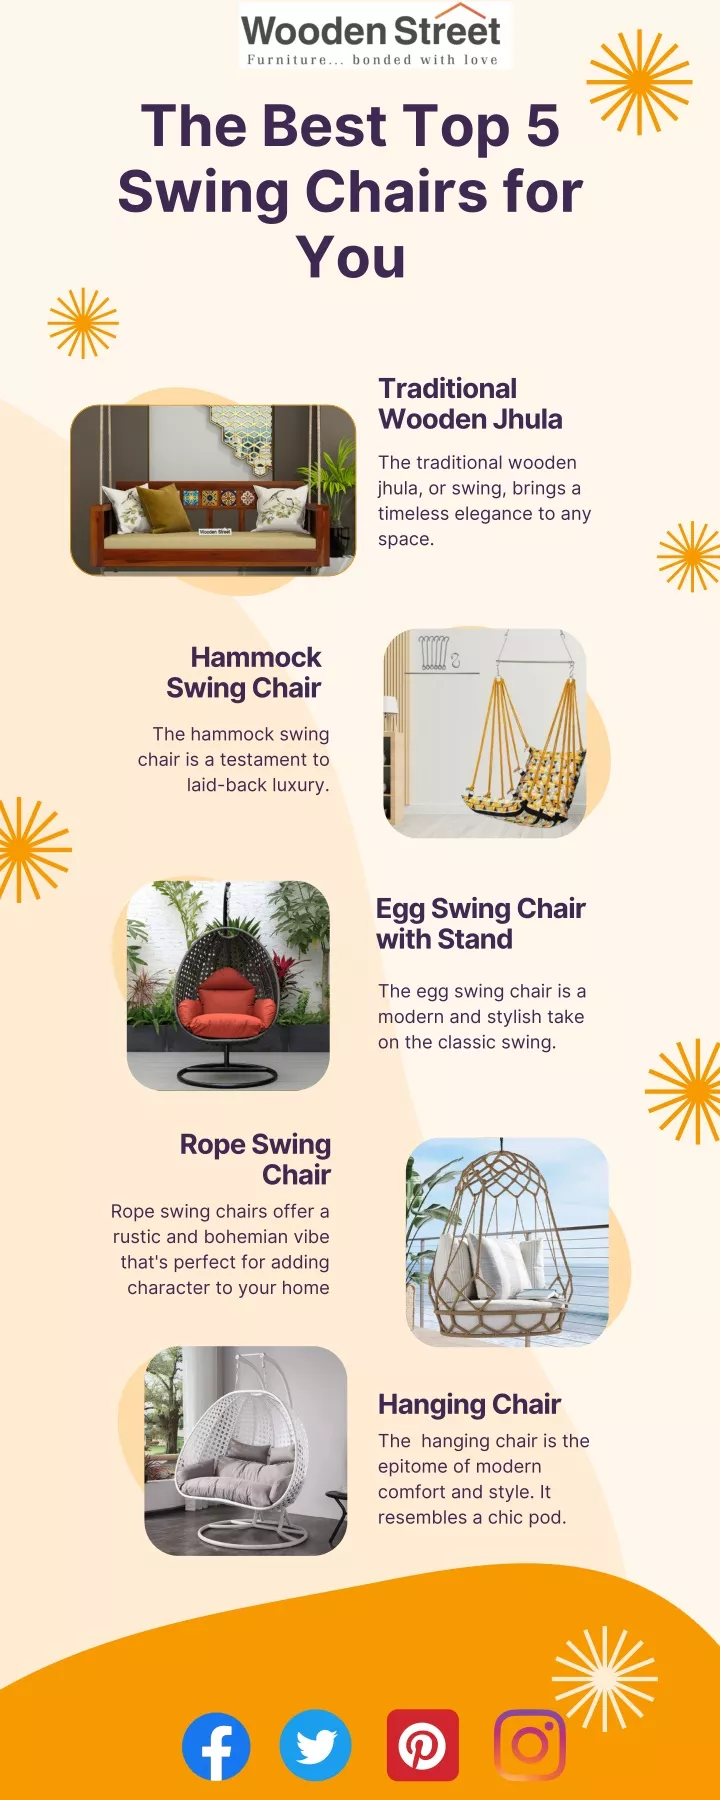 the best top 5 swing chairs for you